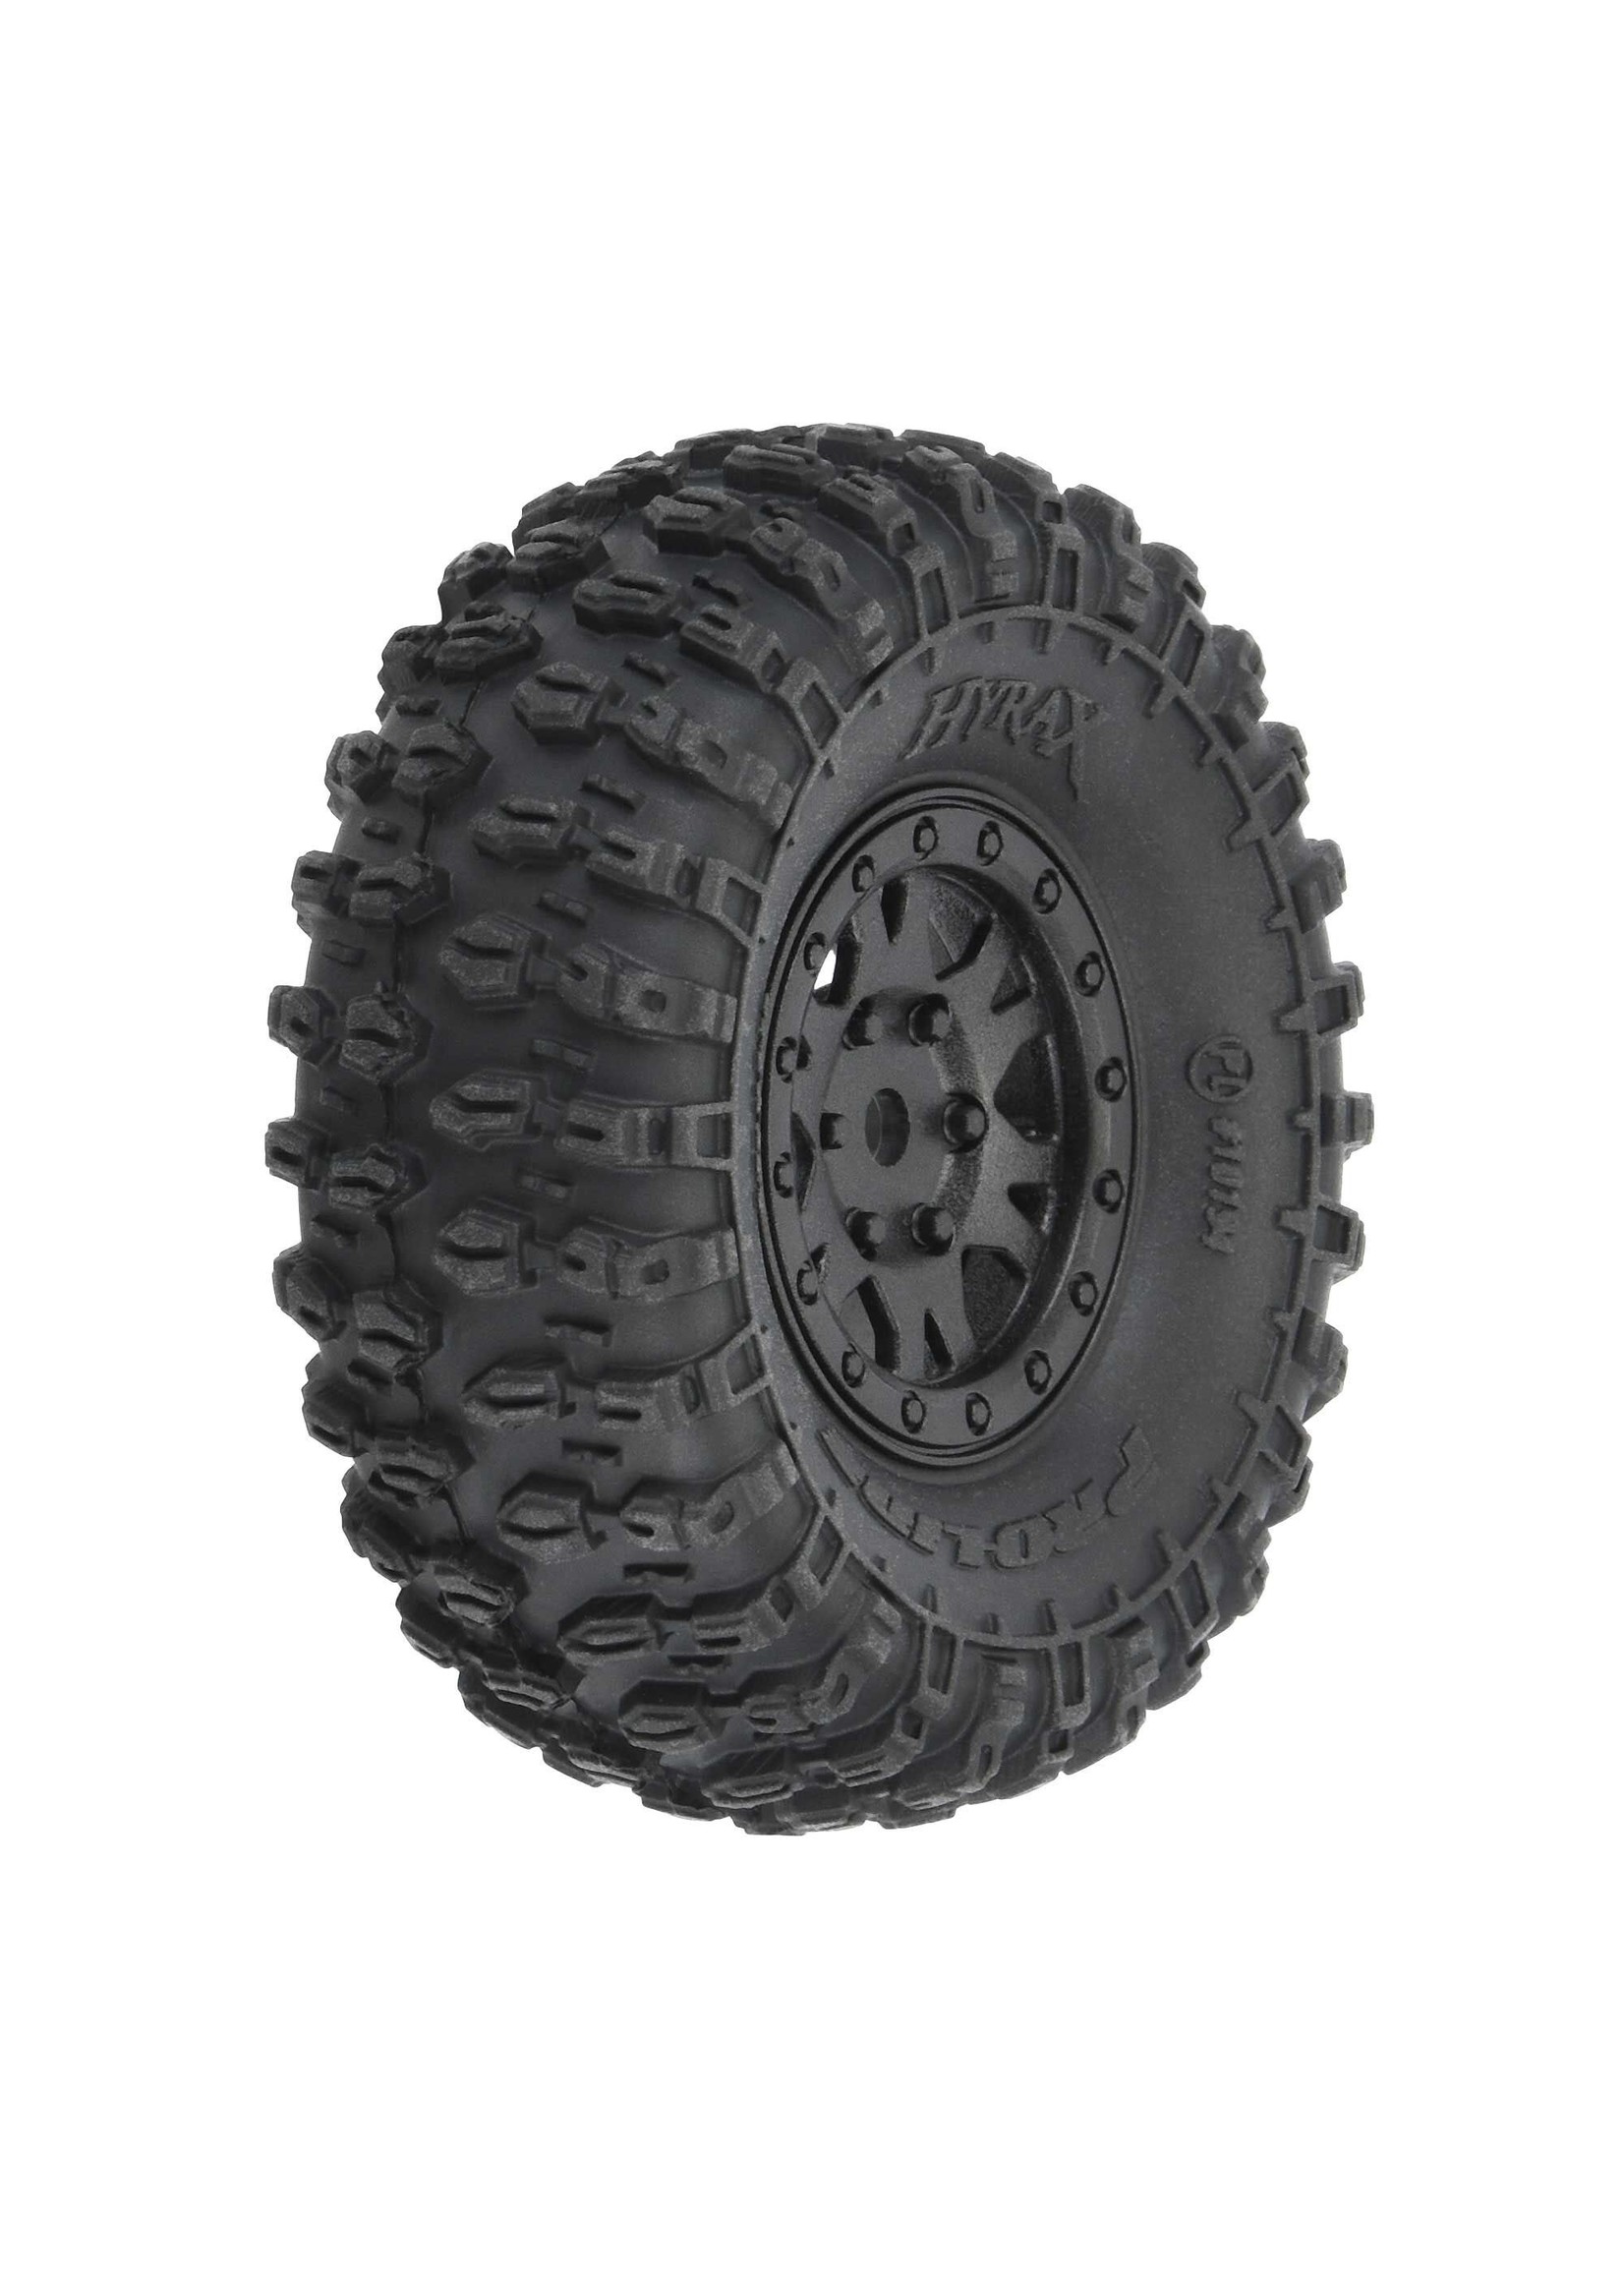 Pro-Line PRO1019410 - 1/24 Hyrax Front/Rear 1.0" Tires Mounted 7mm Black Impulse